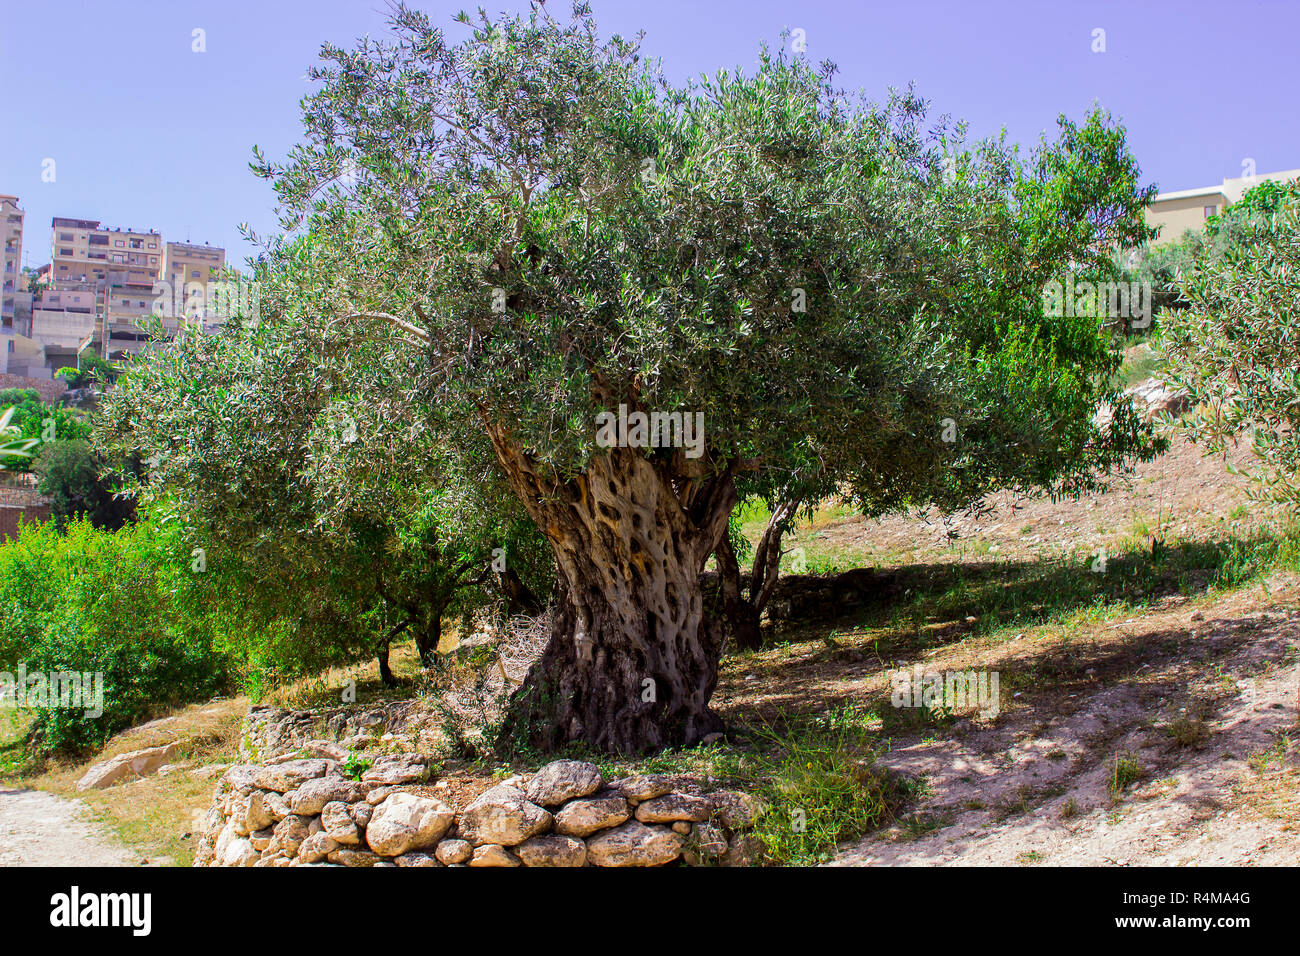 An ancient Olive Tree on a terrace in Nazareth Village Israel in the open air museum of Nazareth Village Israel. This site provides an authentic look  Stock Photo